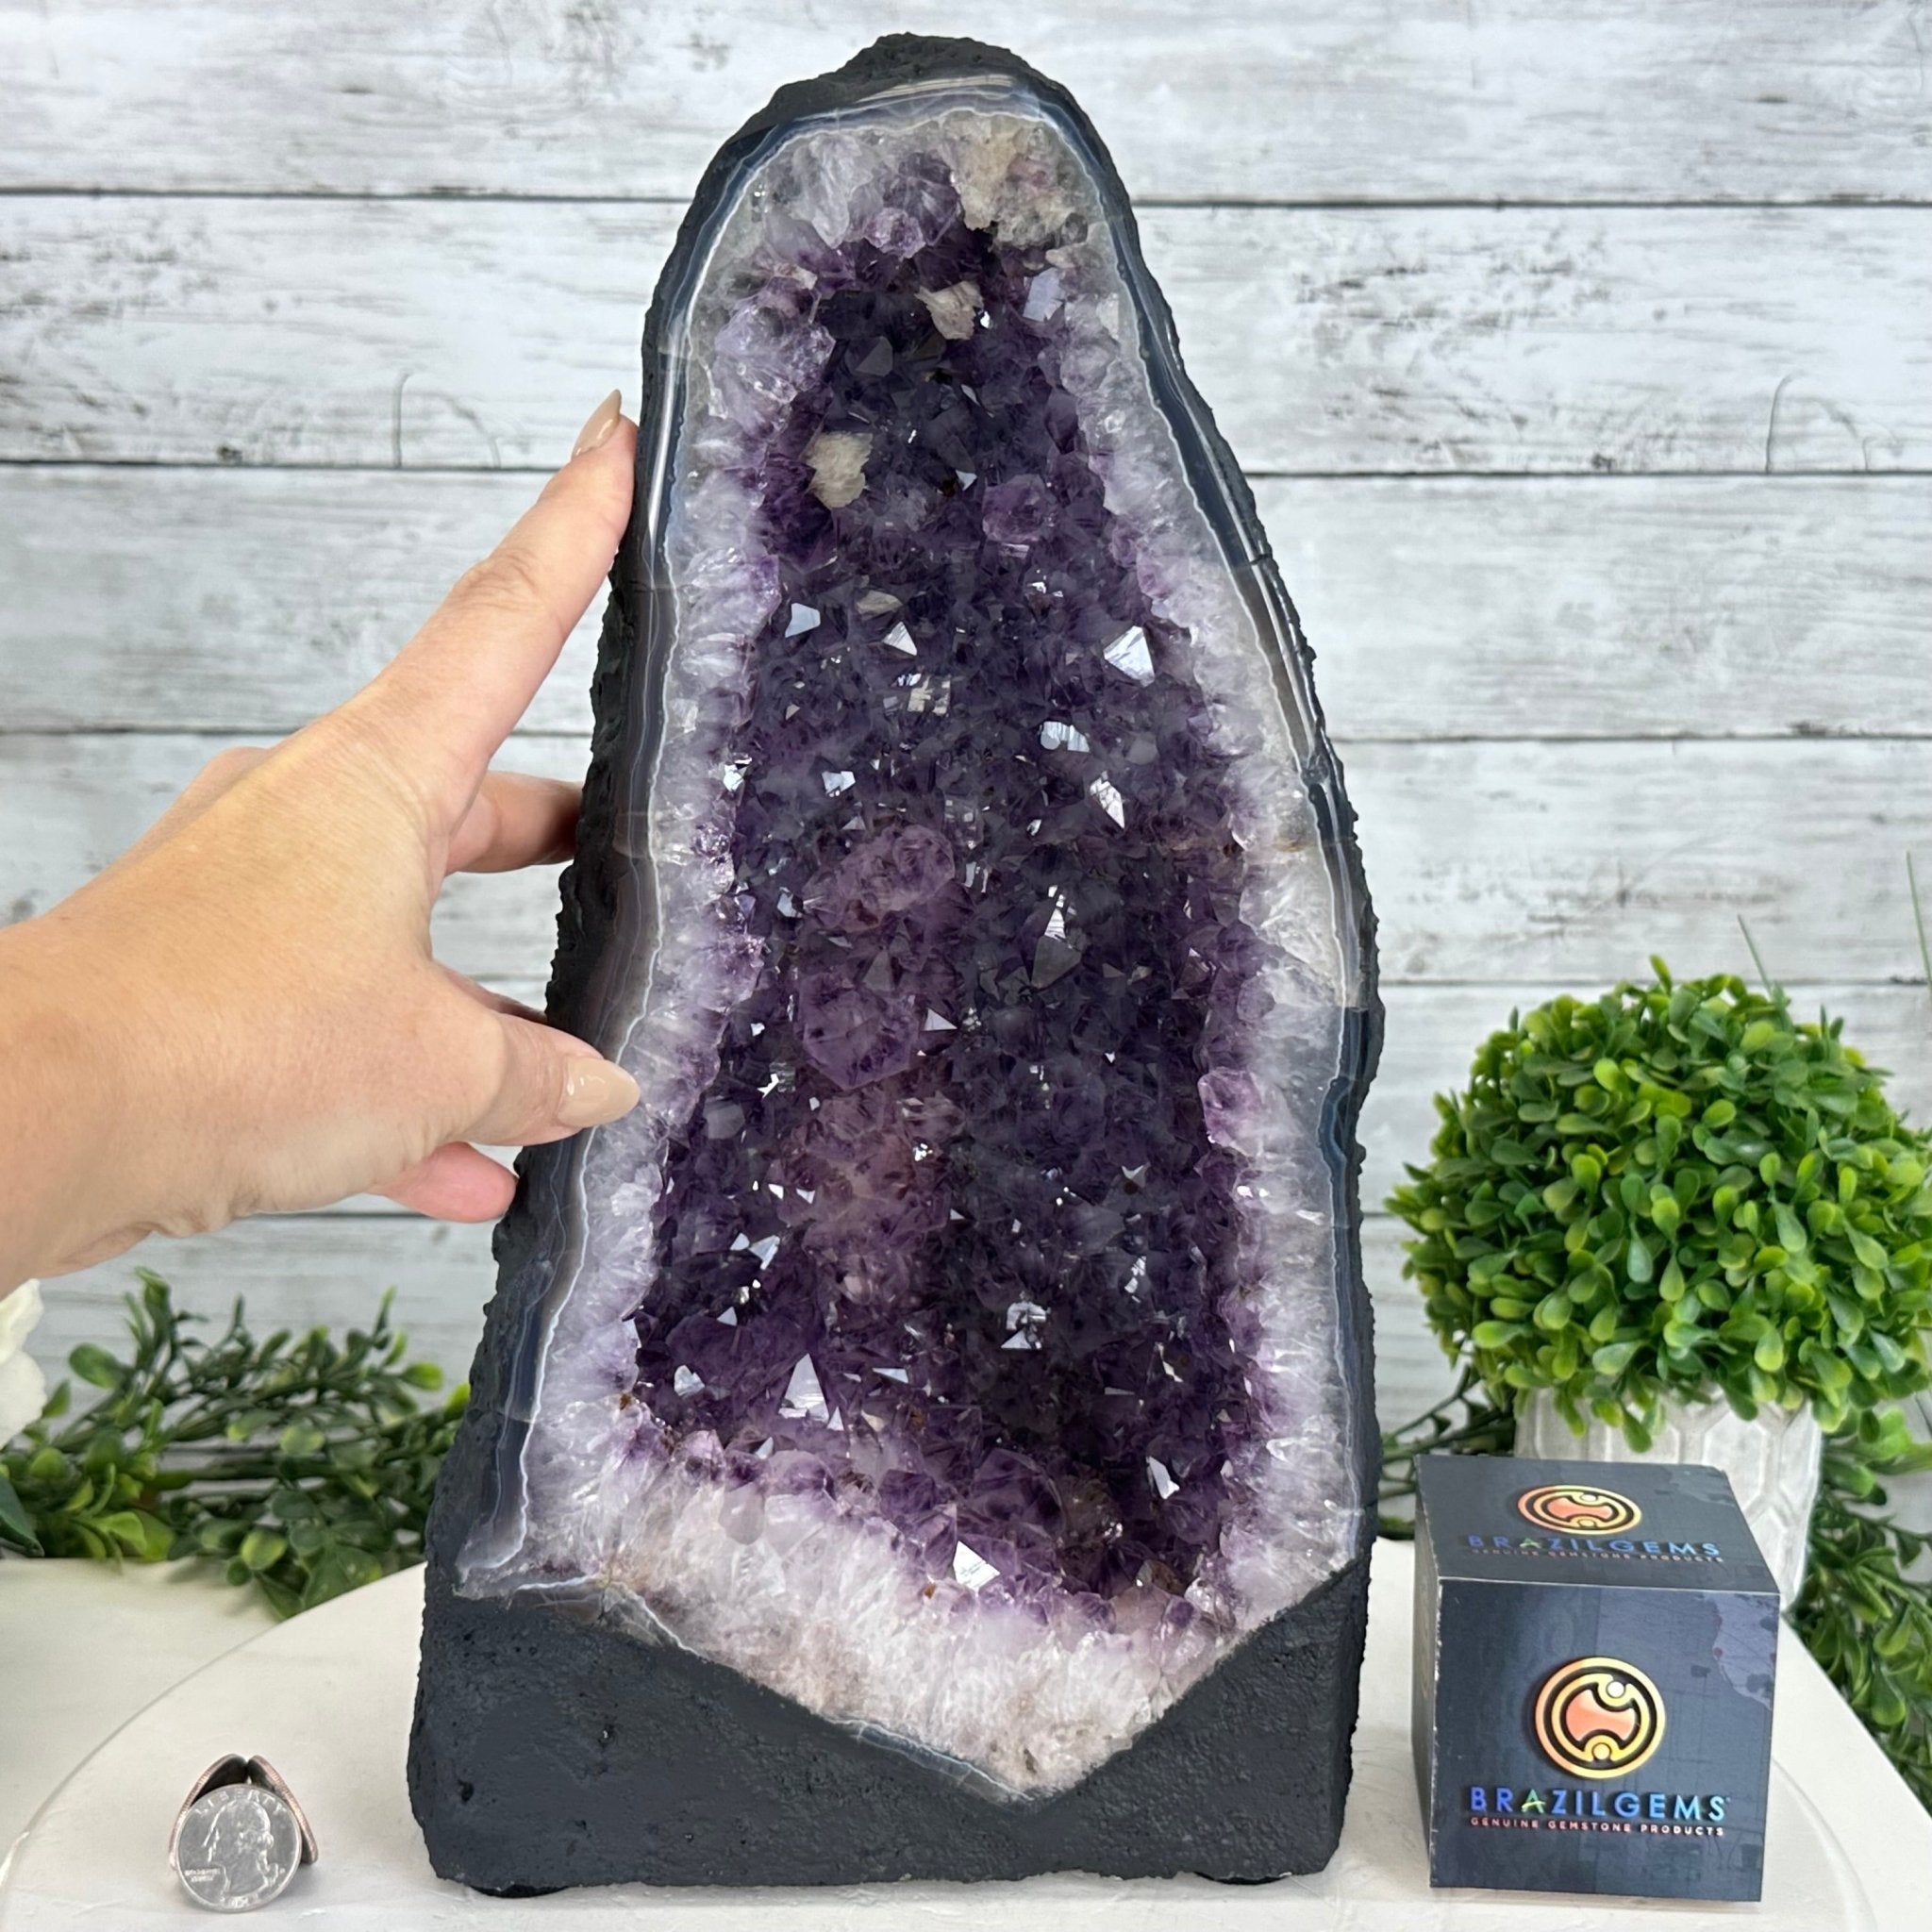 Quality Brazilian Amethyst Cathedral, 17.2 lbs & 13.8" Tall, #5601 - 1372 - Brazil GemsBrazil GemsQuality Brazilian Amethyst Cathedral, 17.2 lbs & 13.8" Tall, #5601 - 1372Cathedrals5601 - 1372